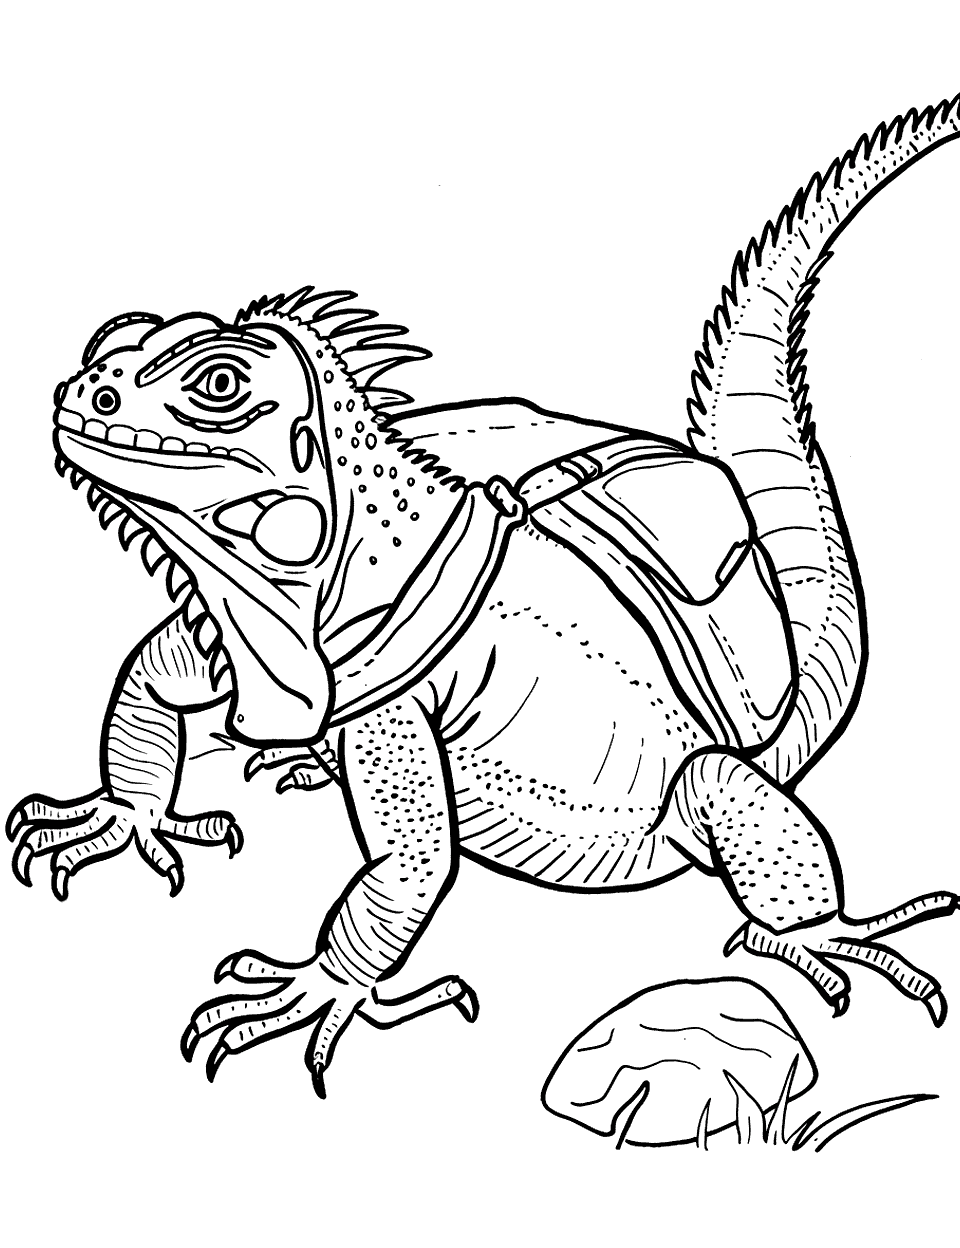 Traveling Iguana with a Backpack Lizard Coloring Page - An iguana with a small backpack, ready for a summer adventure.